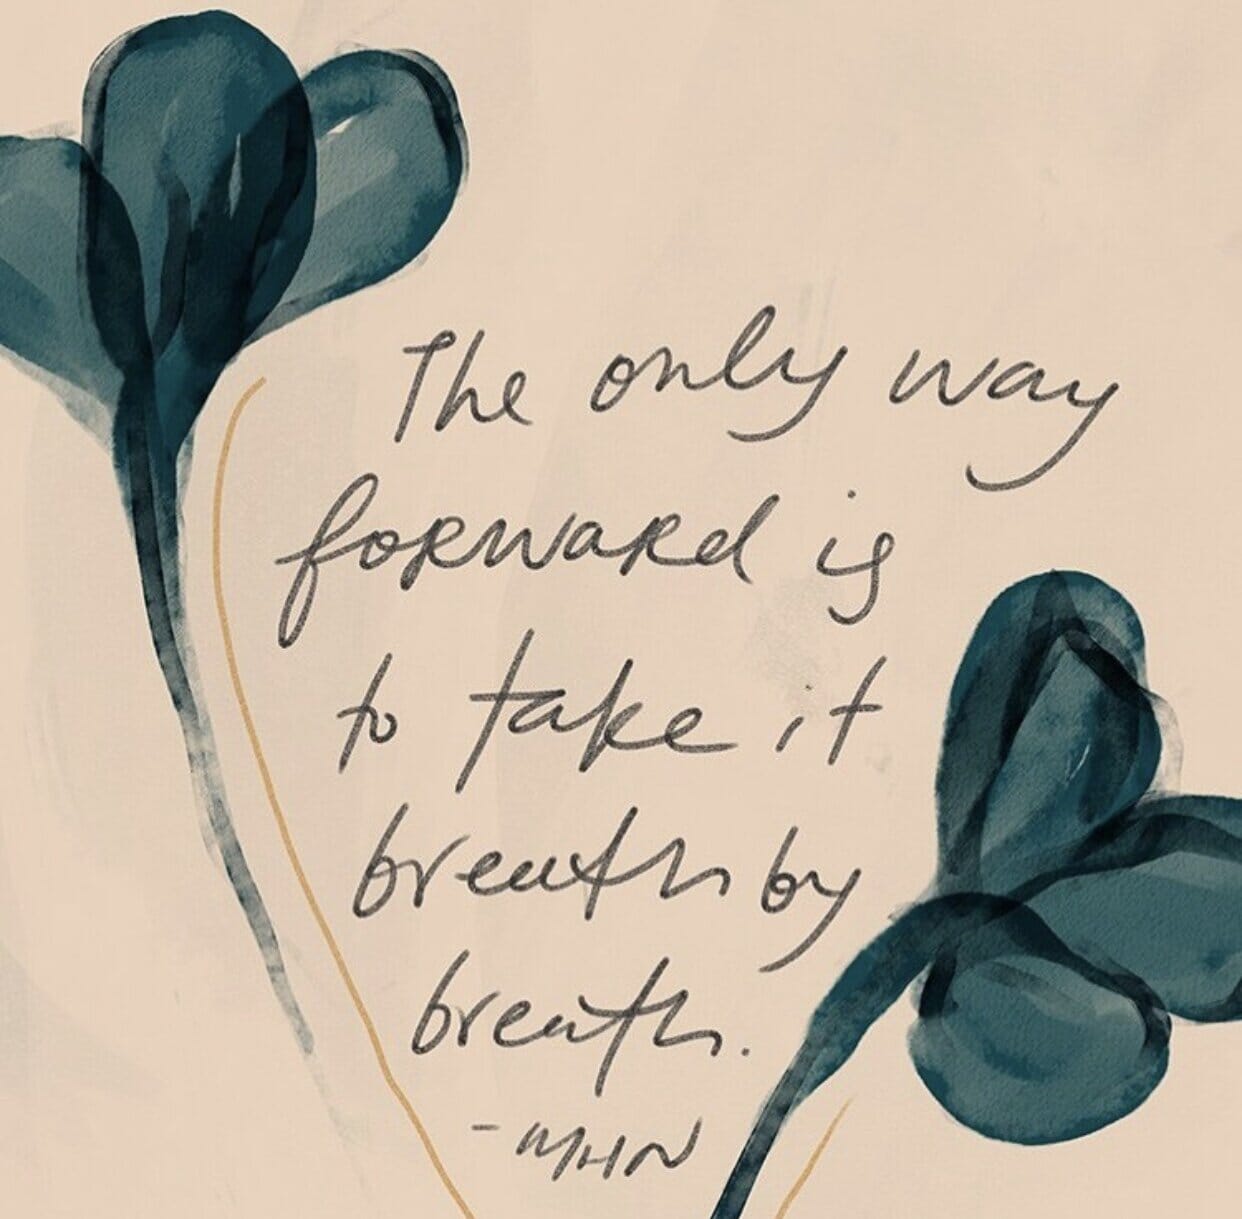 graphic with quote that reads "The only way forward is to take it breath by breath."